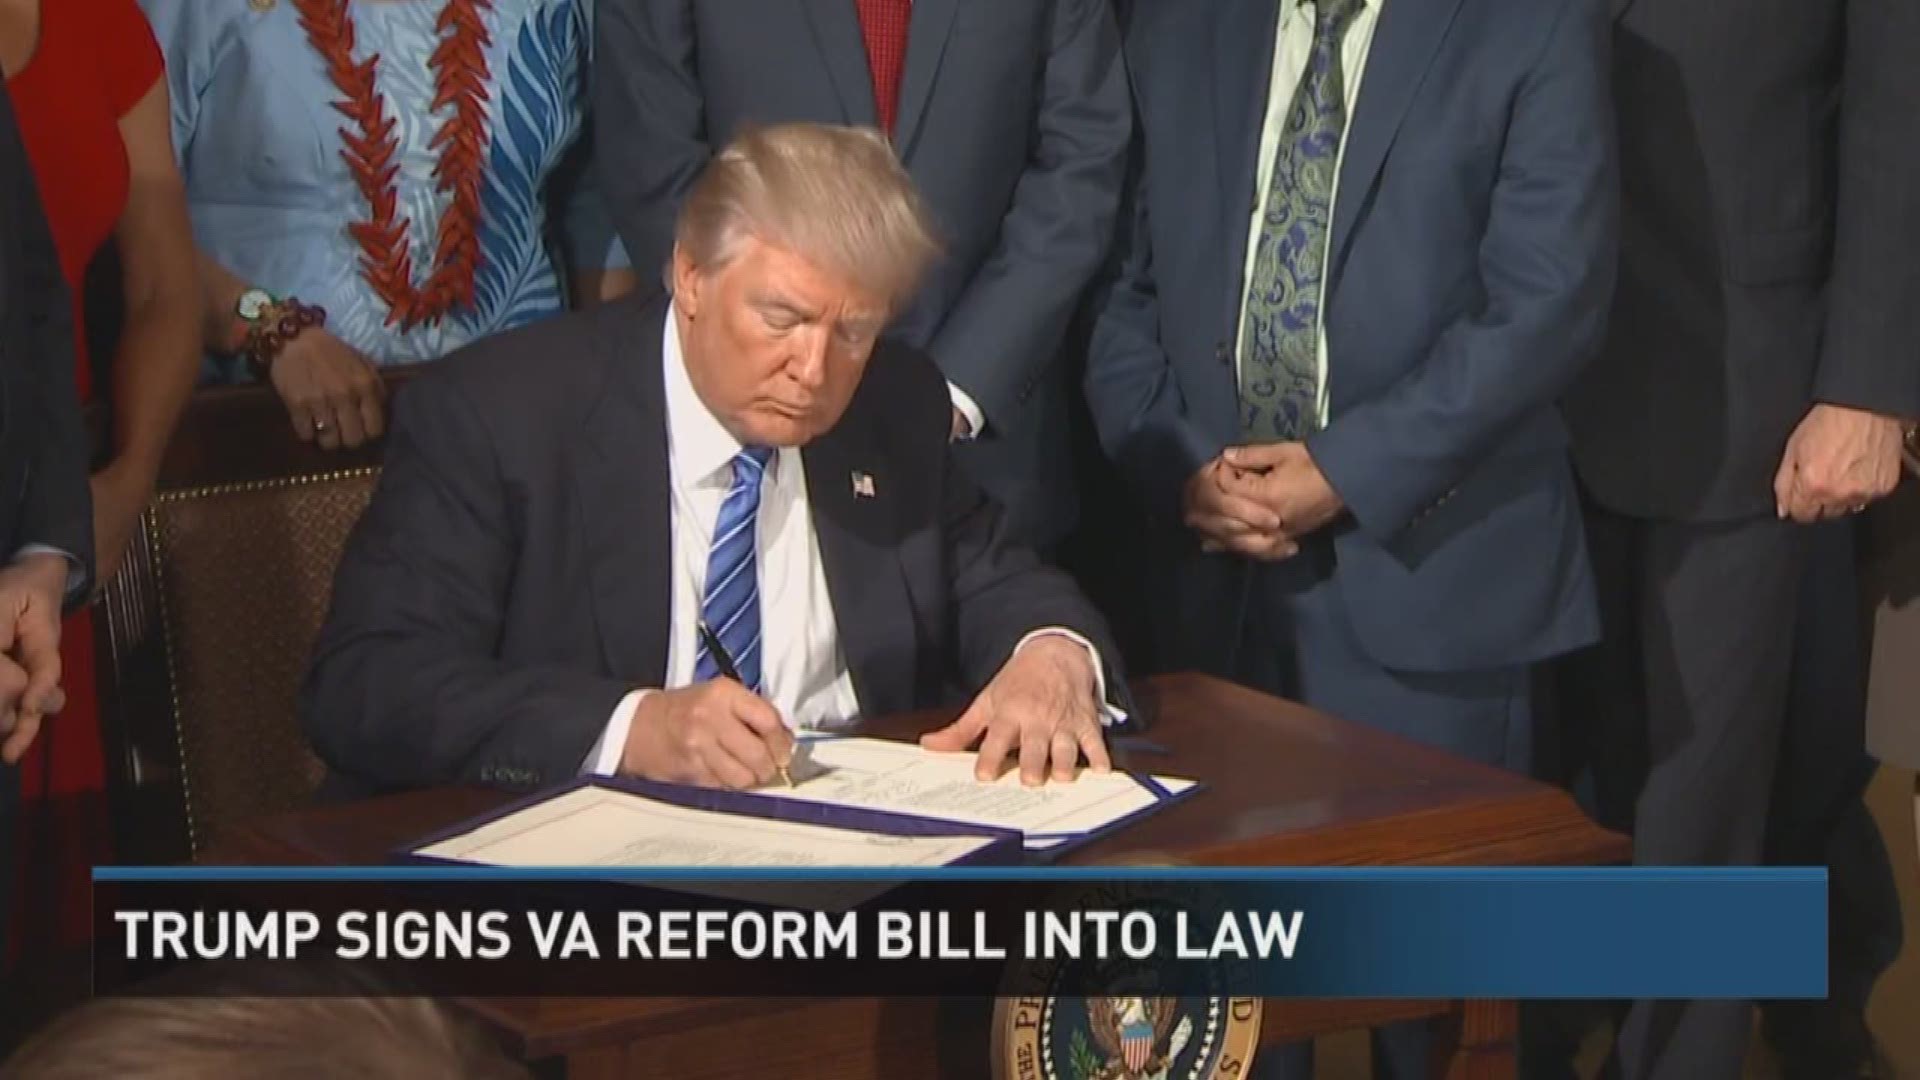 President Trump signed a reform bill into law to help improve the Department of Veteran Affairs.